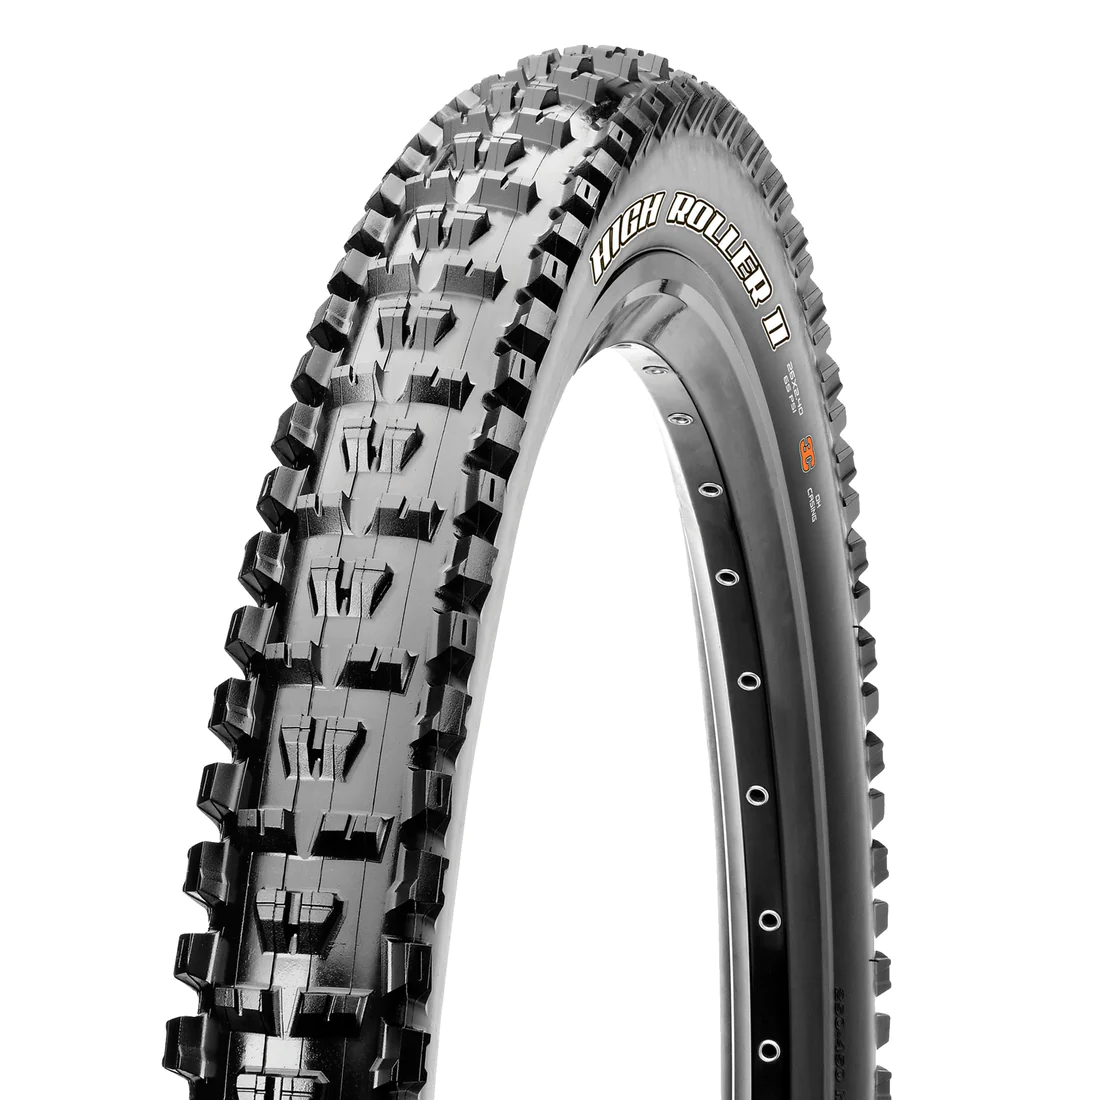 MAXXIS Maxxis DH HIgh Roller II 27.5x4.0 W60 TPI SC DP